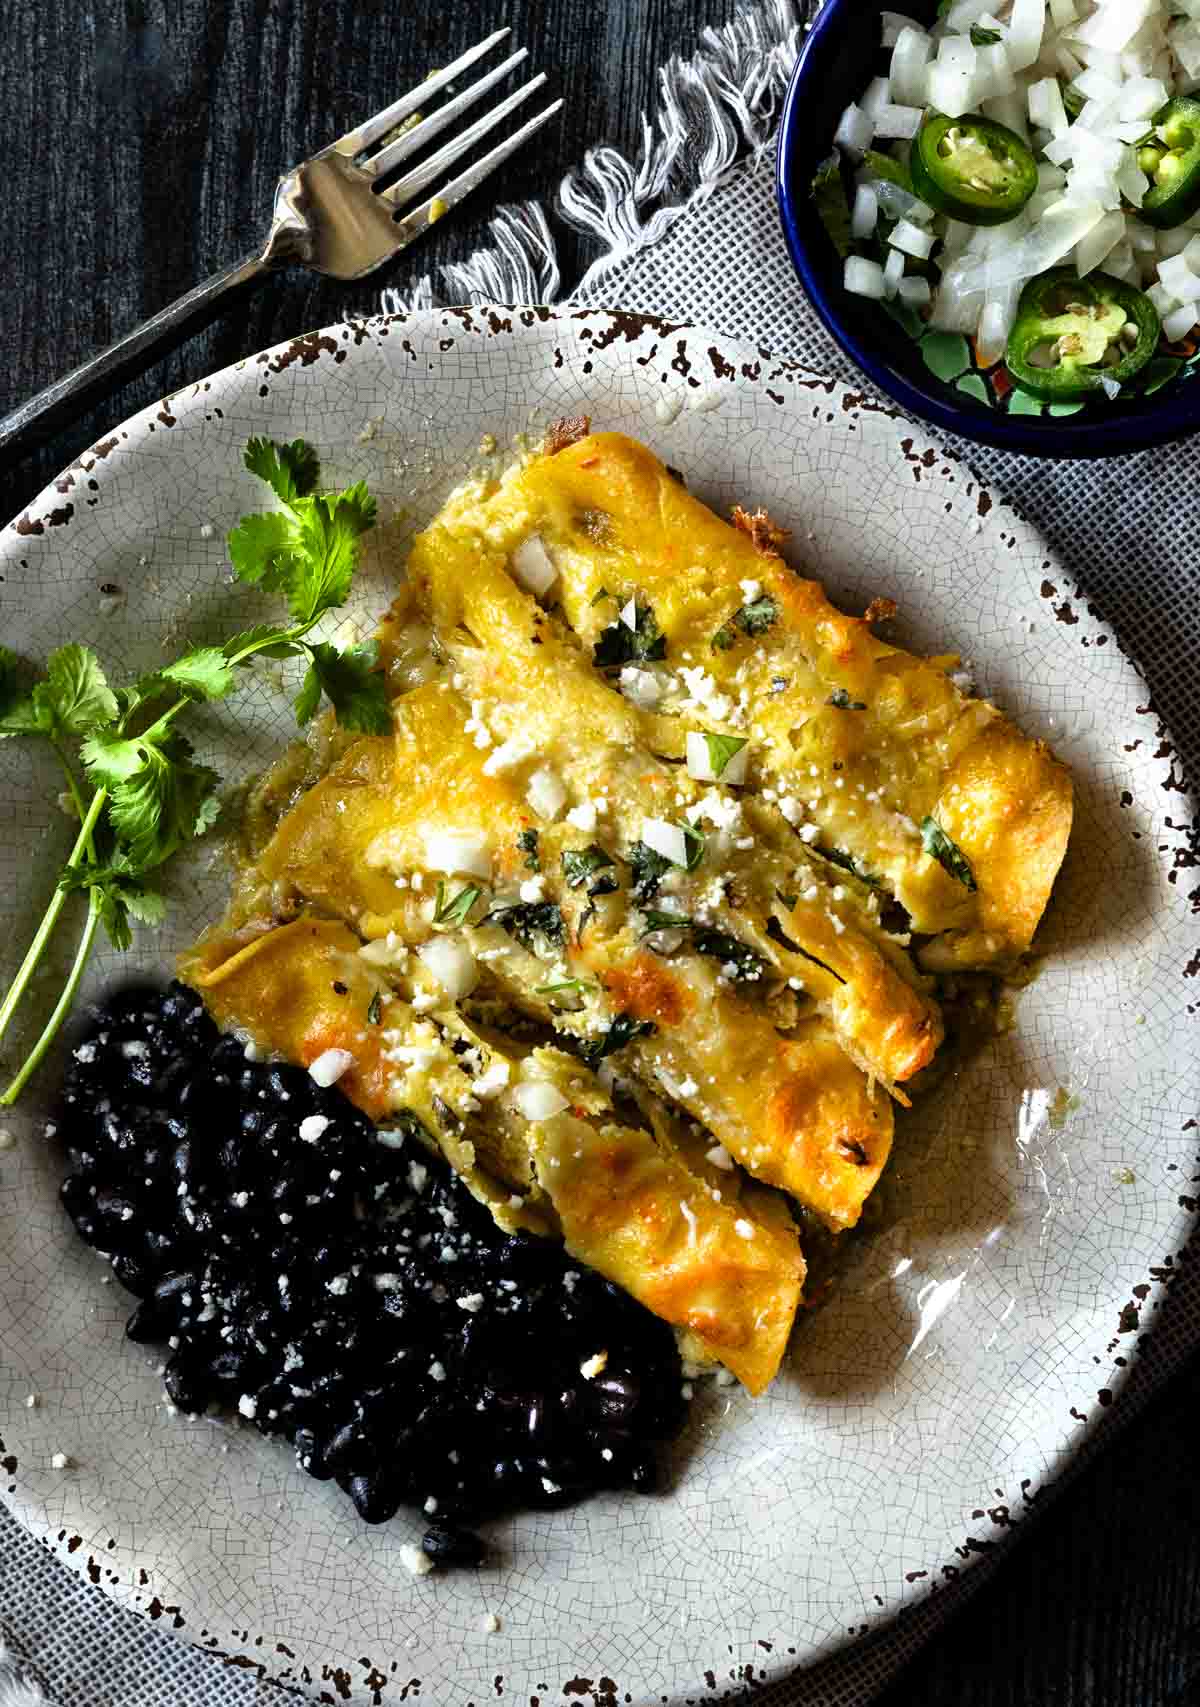 Pulled pork enchiladas verde served on a rustic plate with black beans.